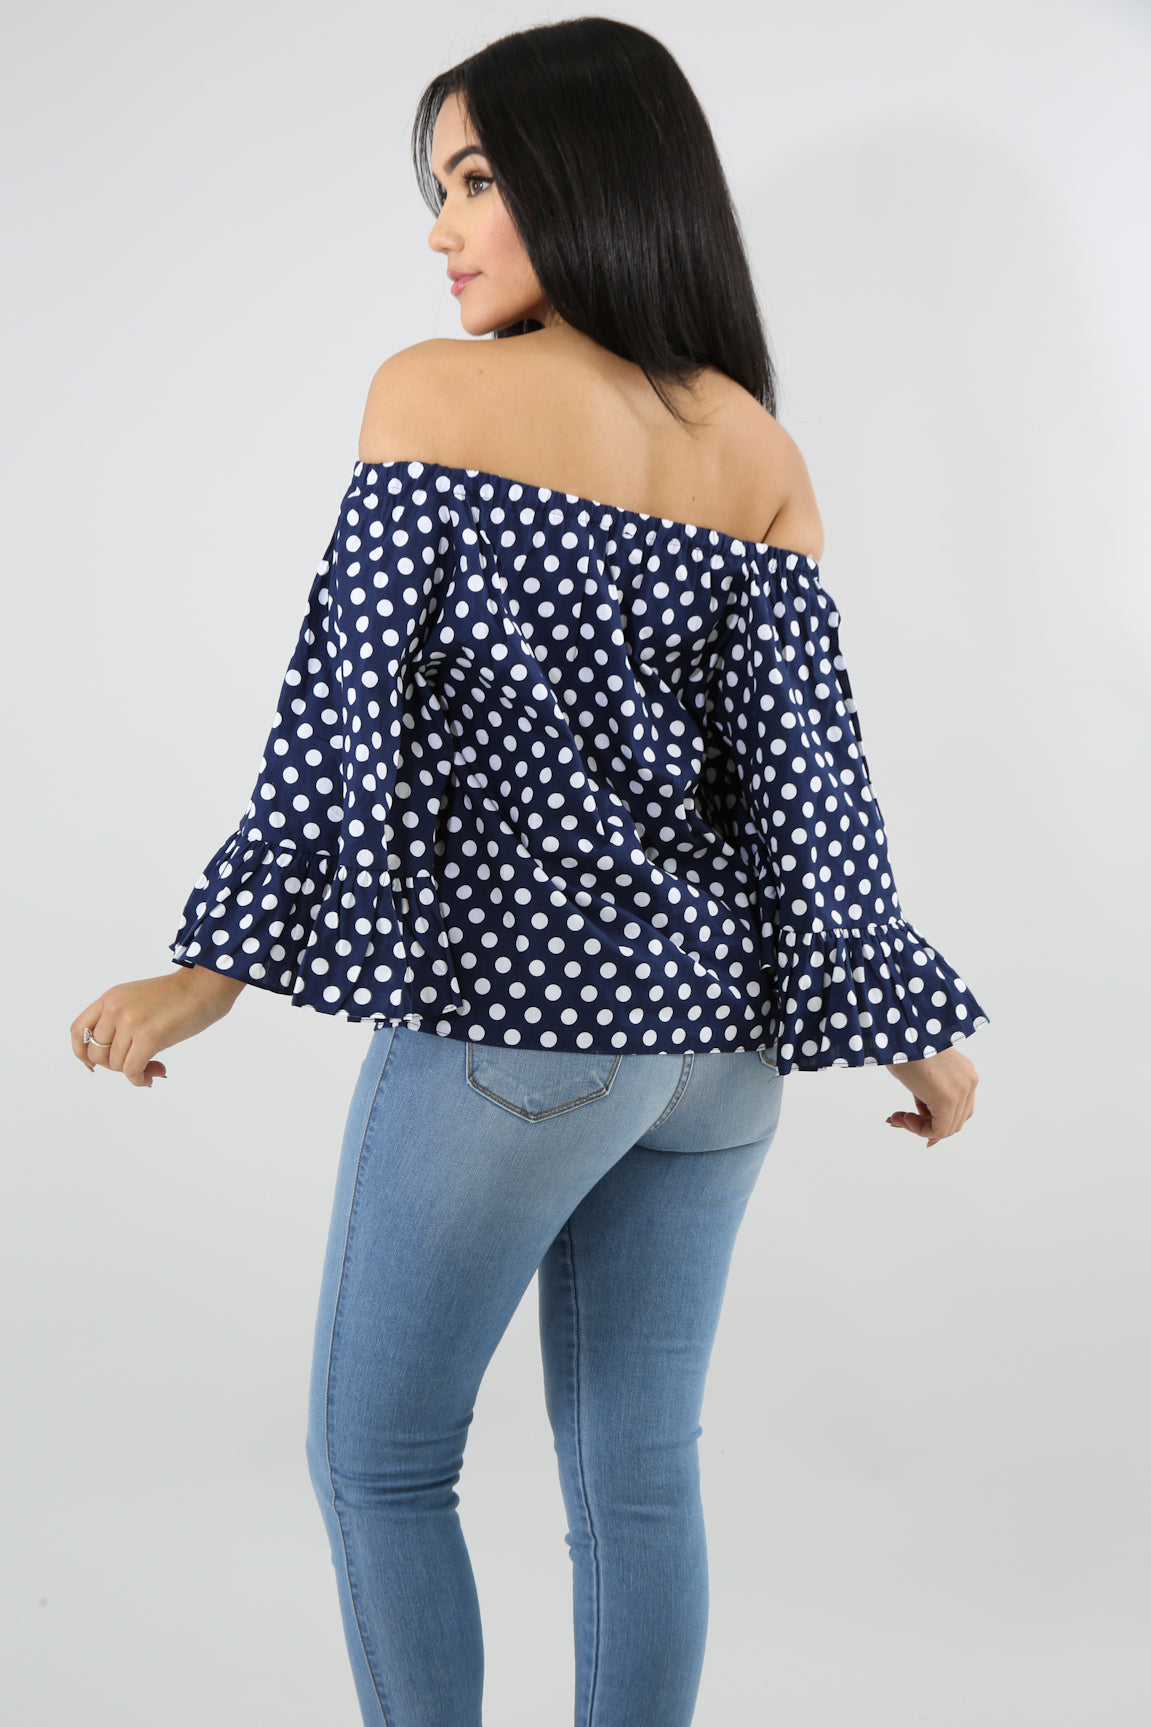 Layered Dots Off the Shoulder Ruffle Top